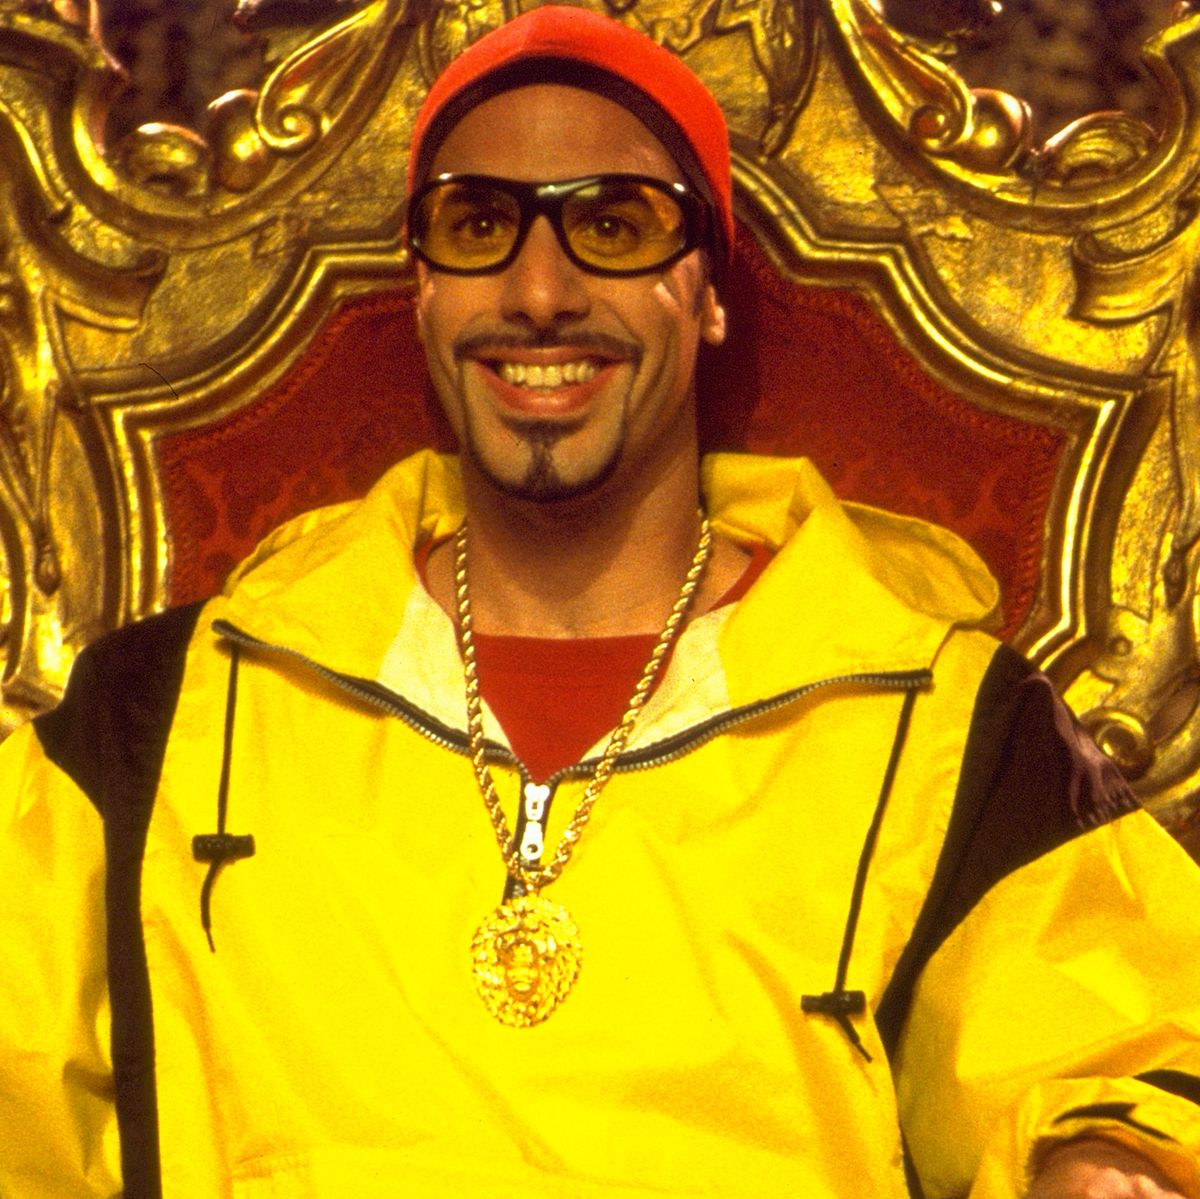 Ali G return scuppered as snowflakes claim Sacha Baron Cohen character is  'racist' - Daily Star